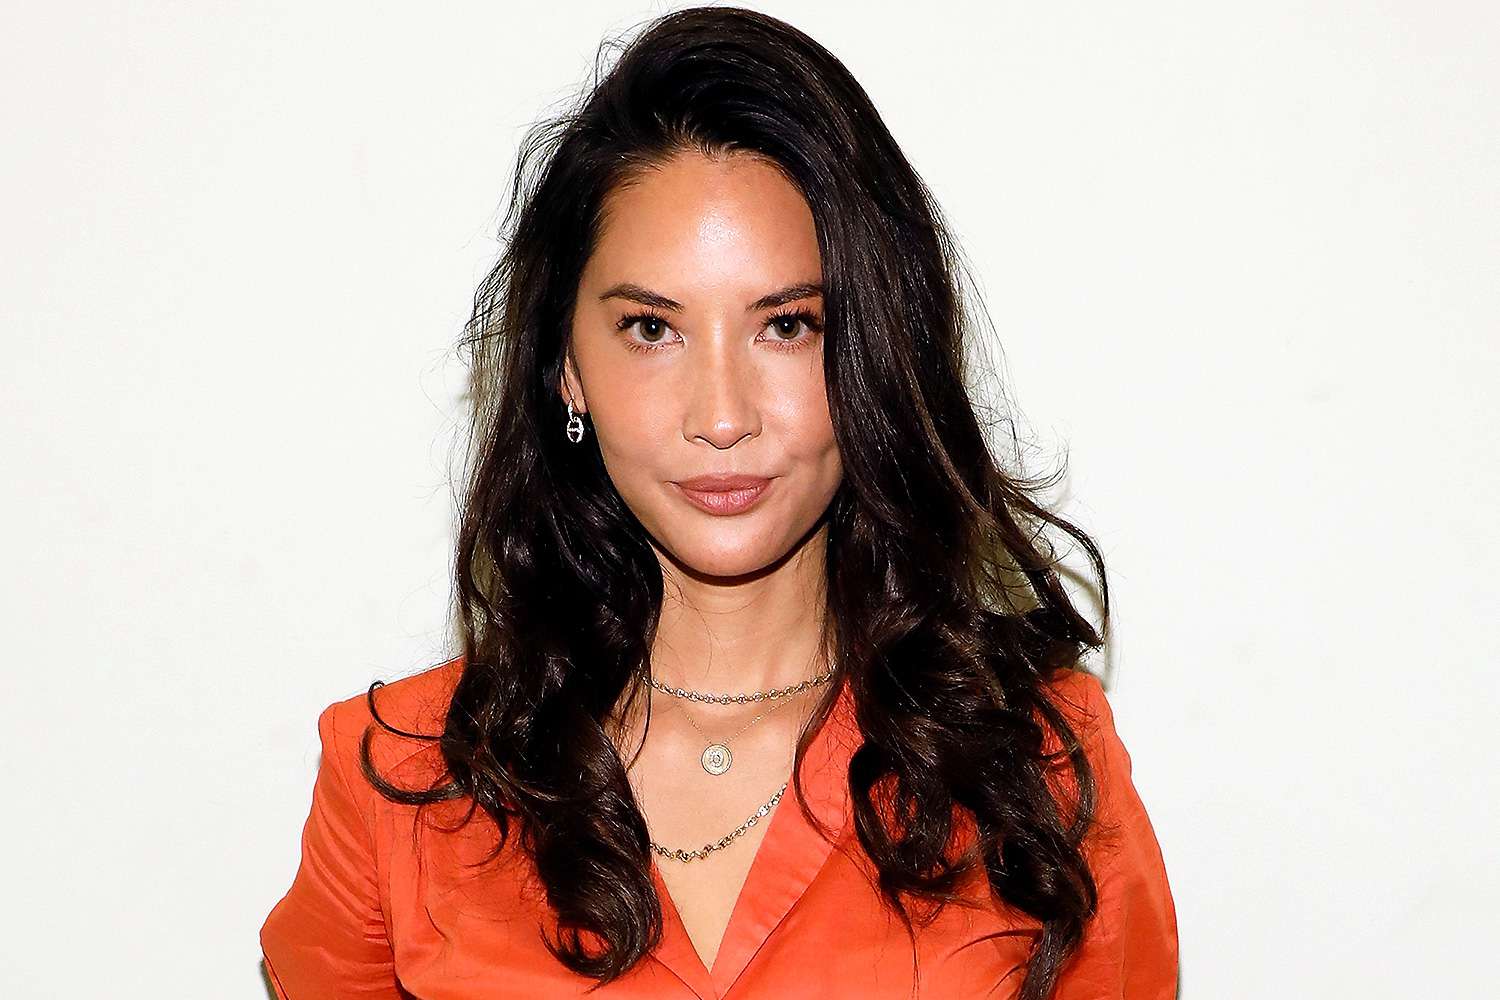 Olivia Munn Biography Height Weight Age Movies Husband Family Salary Net Worth Facts More